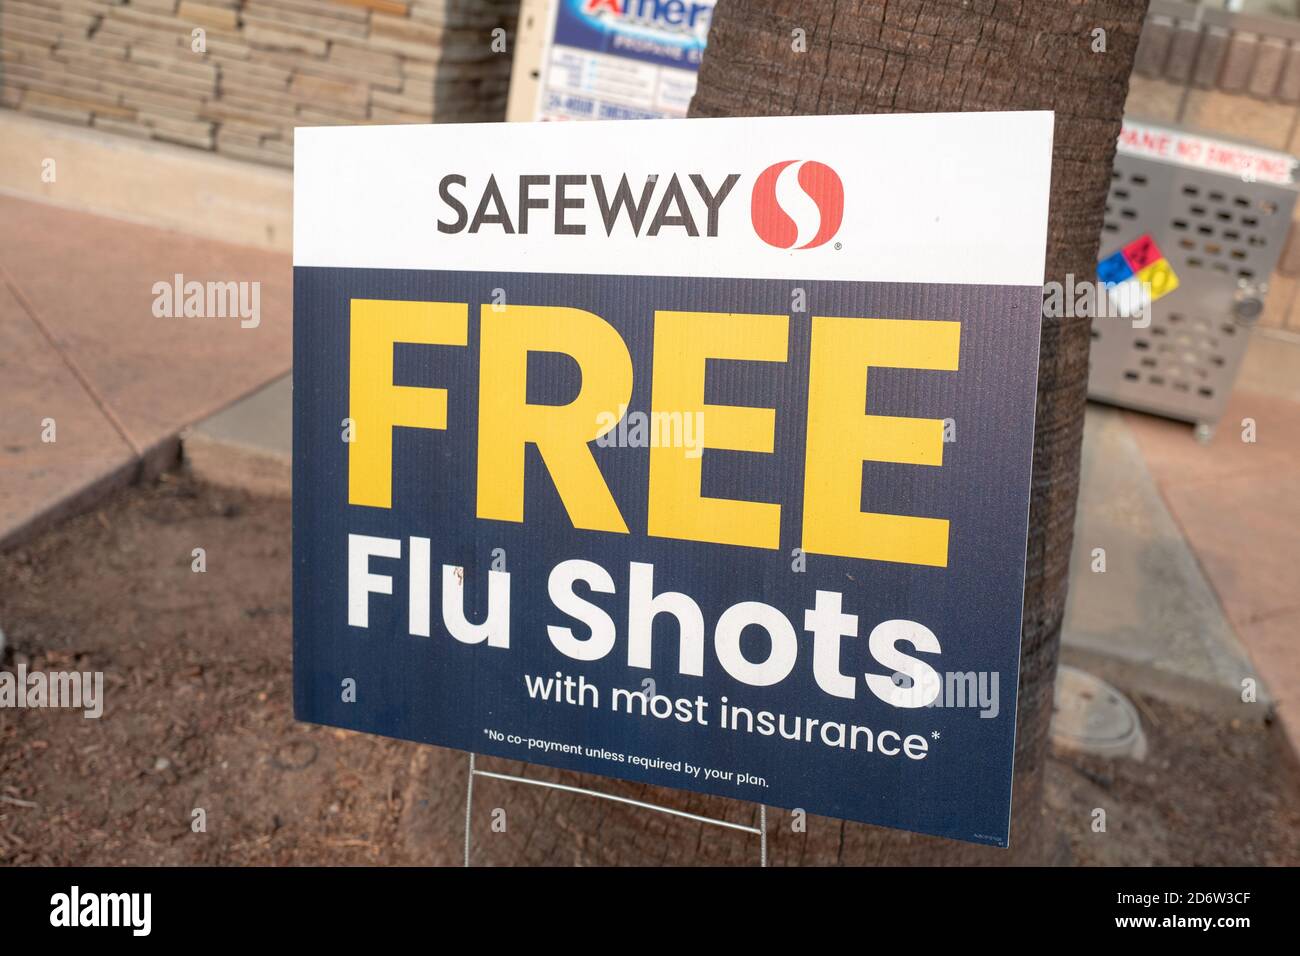 Sign advertising free influenza vaccines (flu shots) for patients with insurance coverage at Safeway supermarket, San Ramon, California, September 12, 2020. () Stock Photo